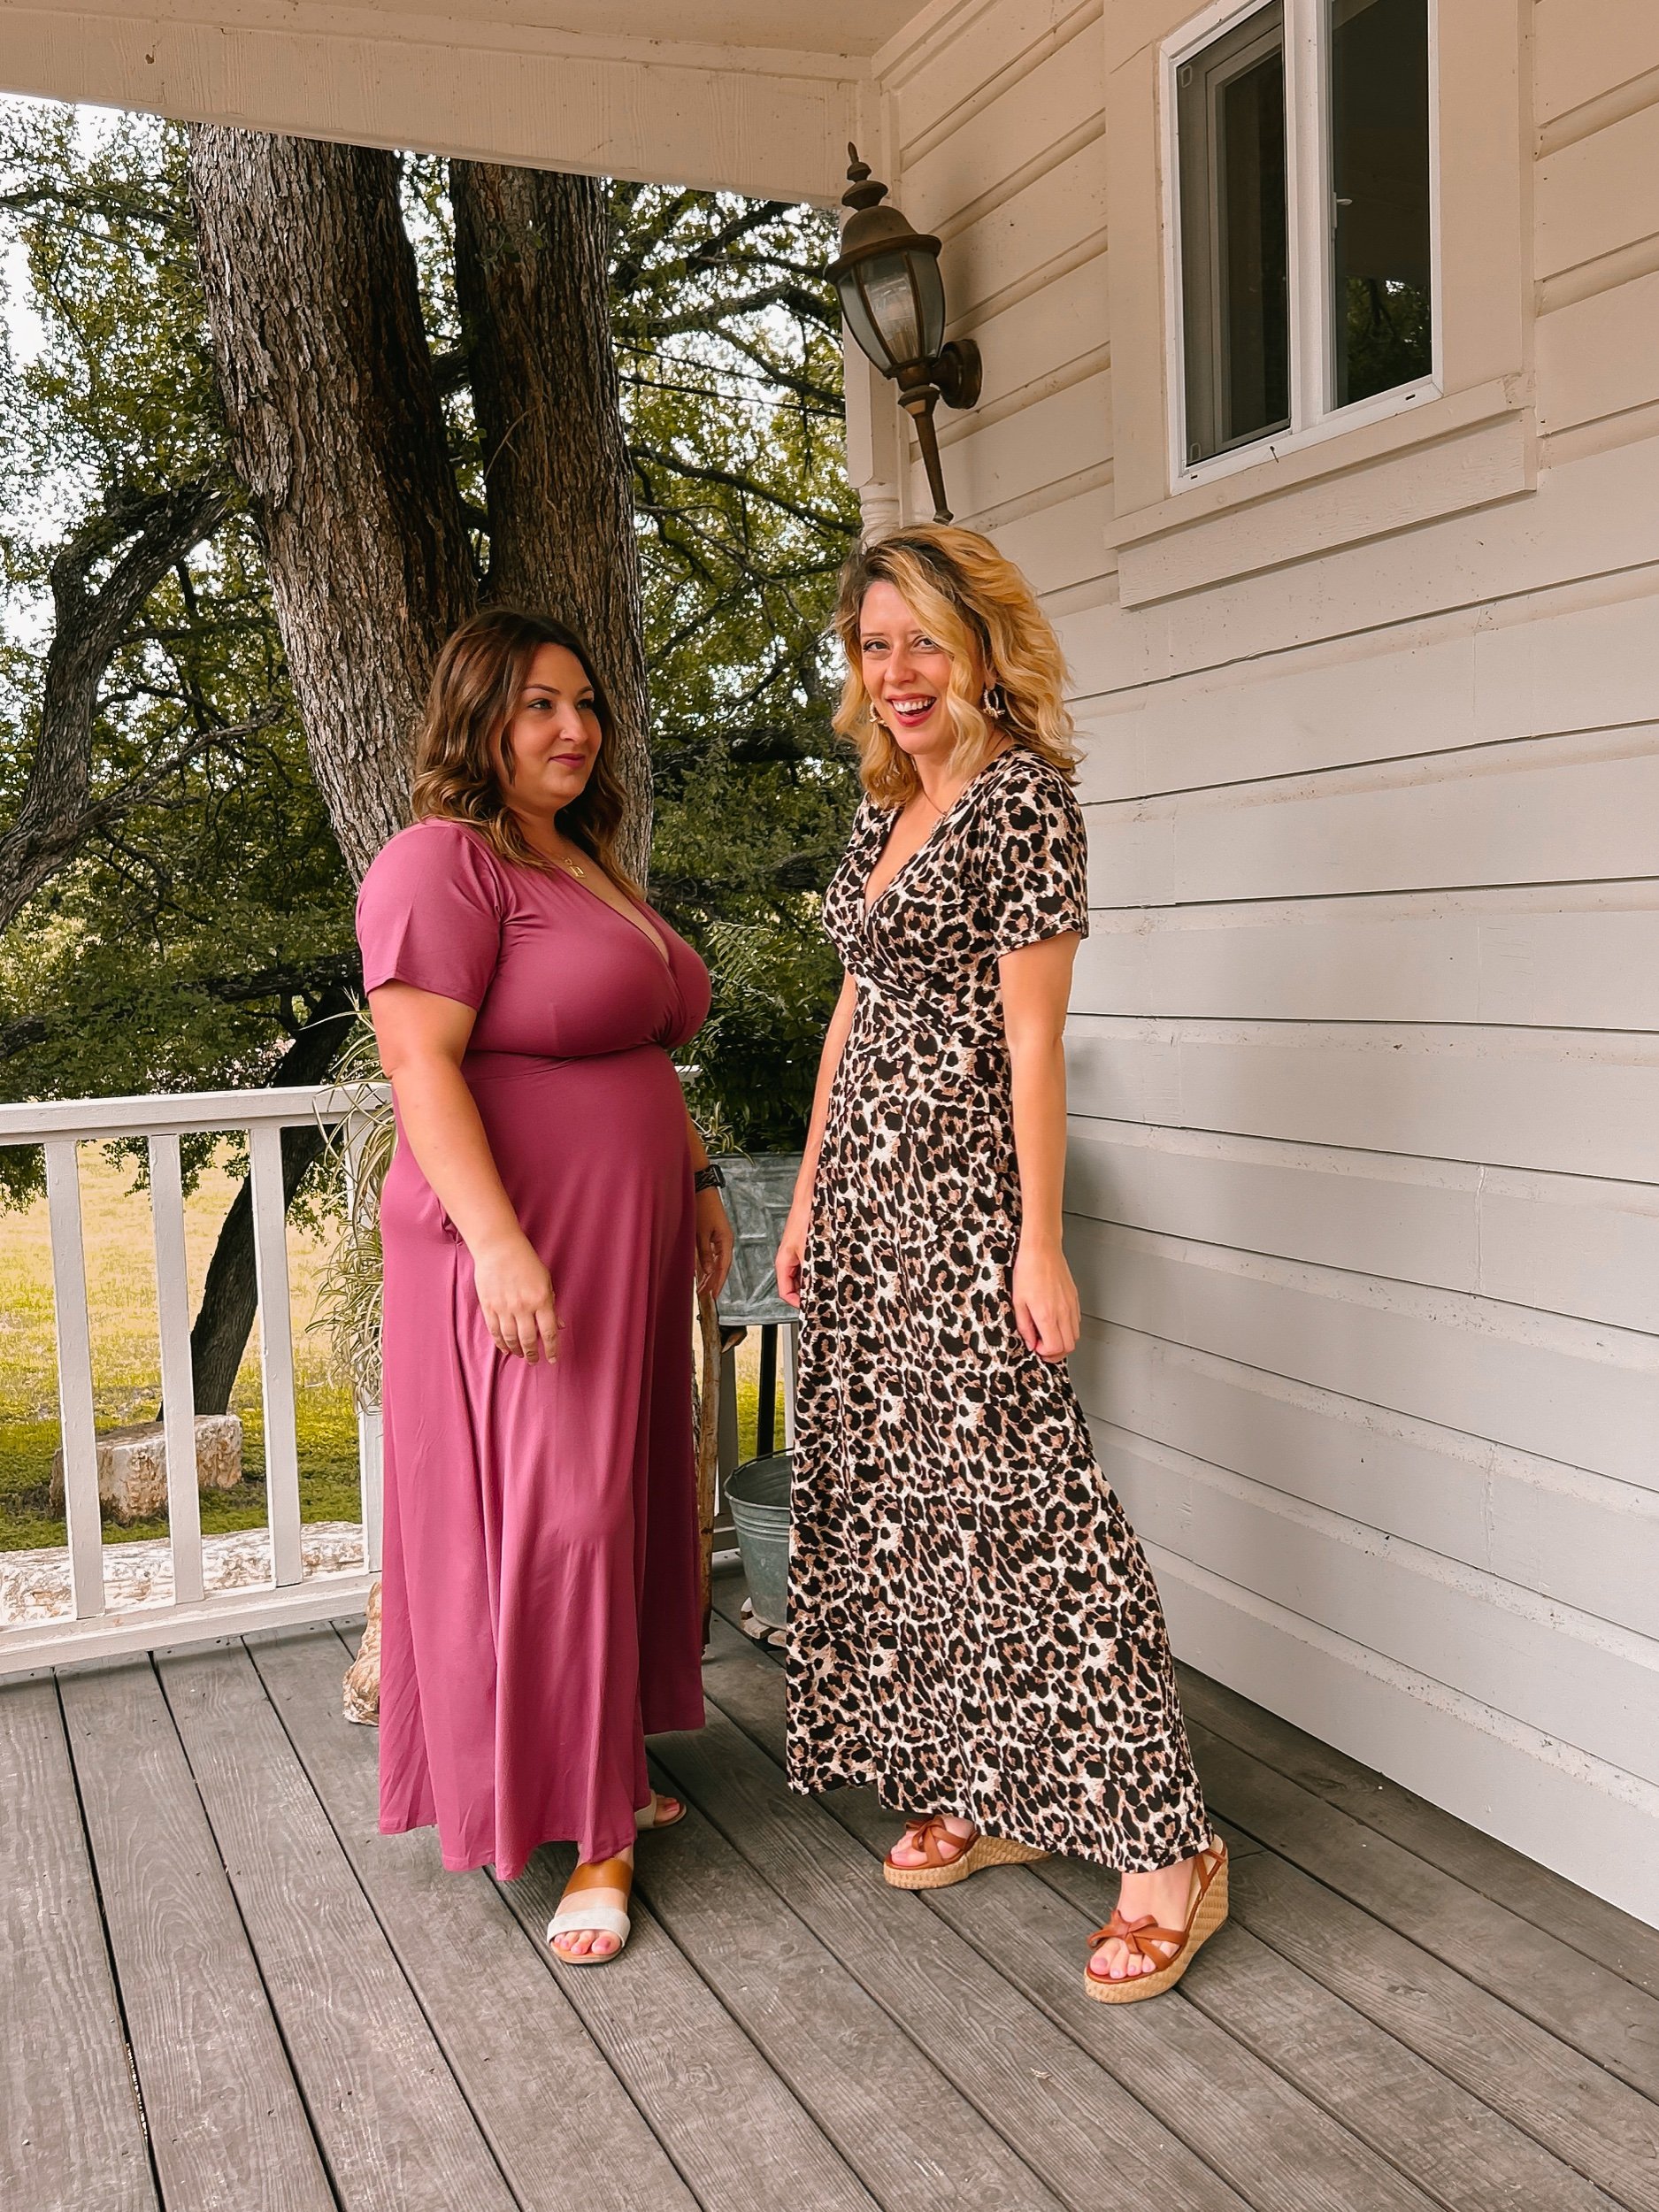 Three Heel Clicks - Girl's Day in Salado While We Talk About Body Positivity